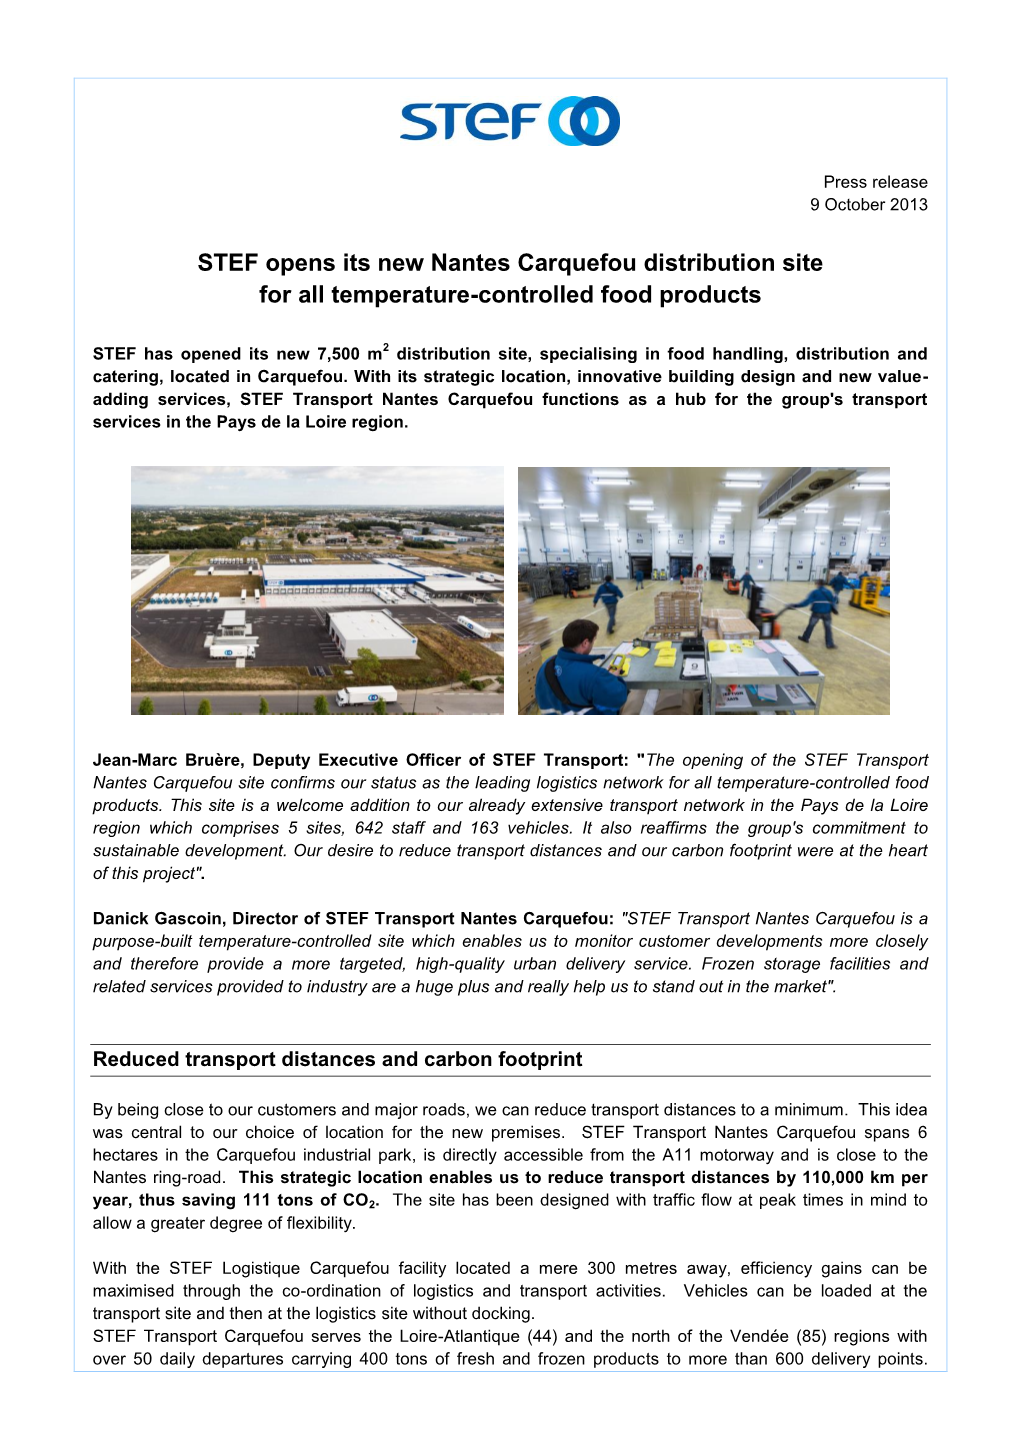 STEF Opens Its New Nantes Carquefou Distribution Site for All Temperature-Controlled Food Products